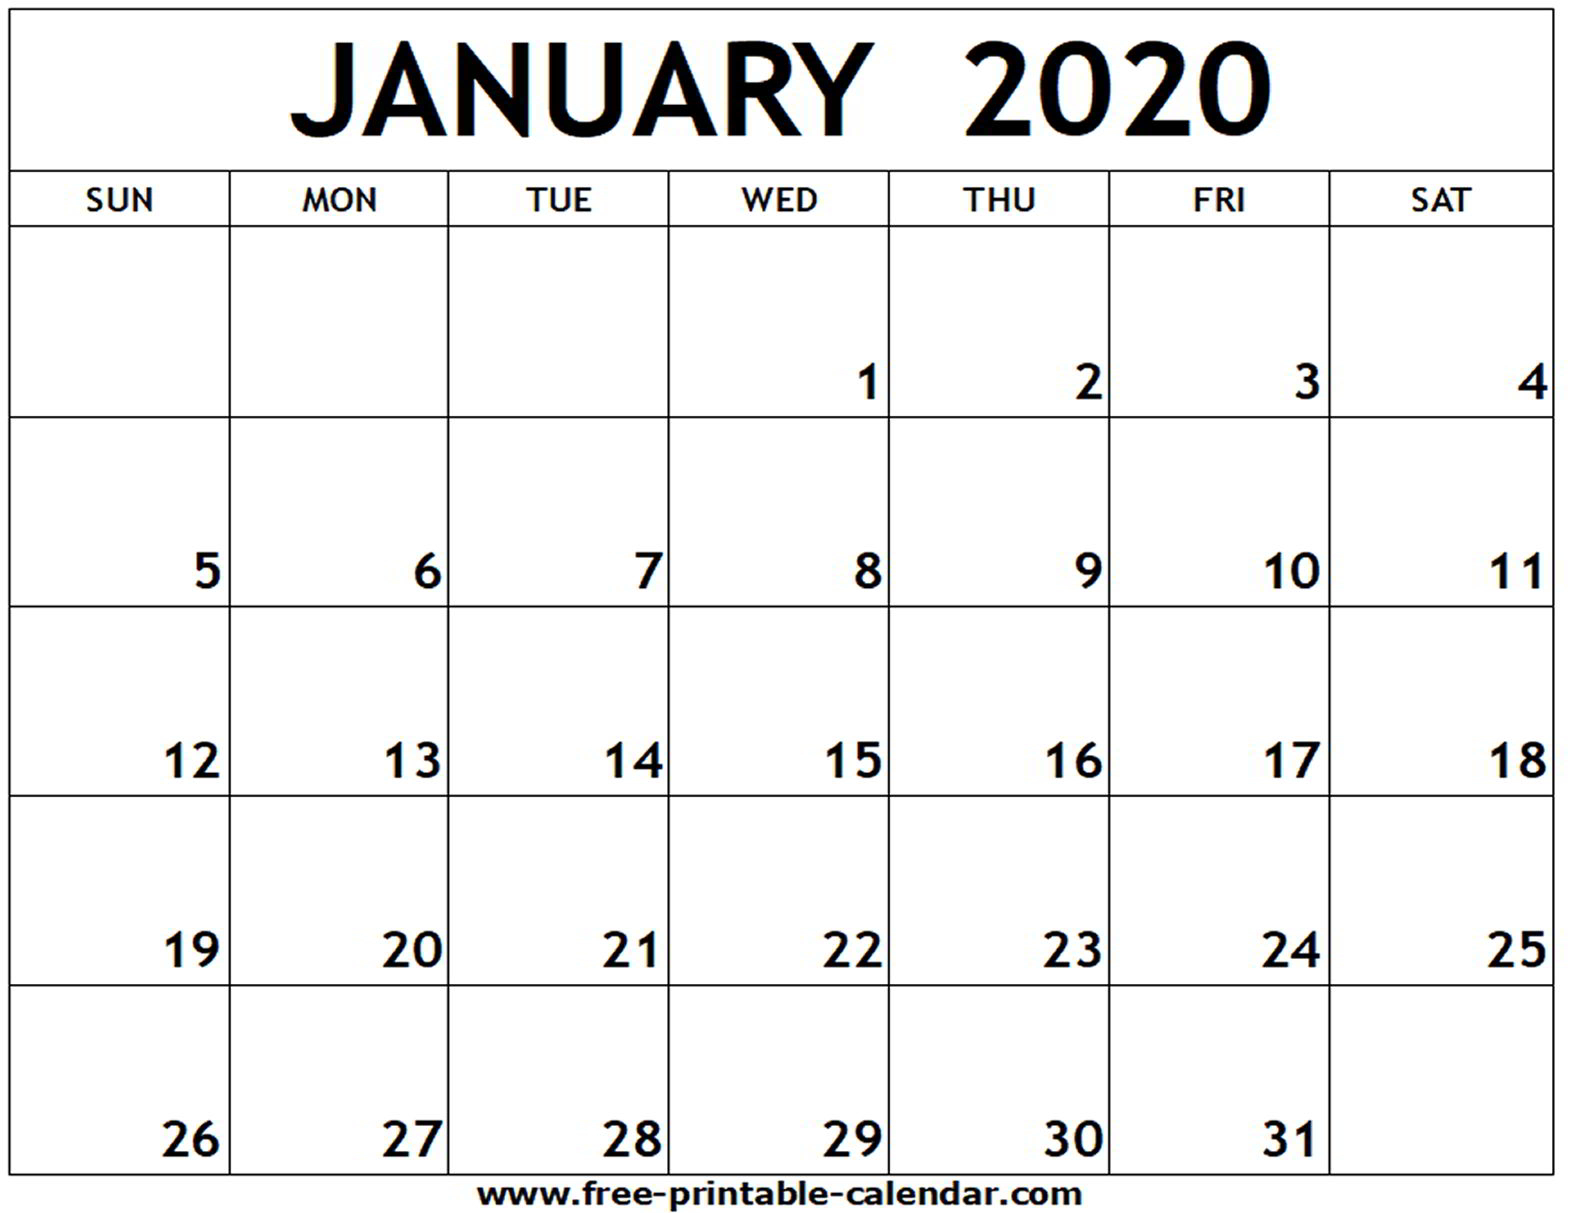 Free Printable Monthly Calendars 2020 - Wpa.wpart.co